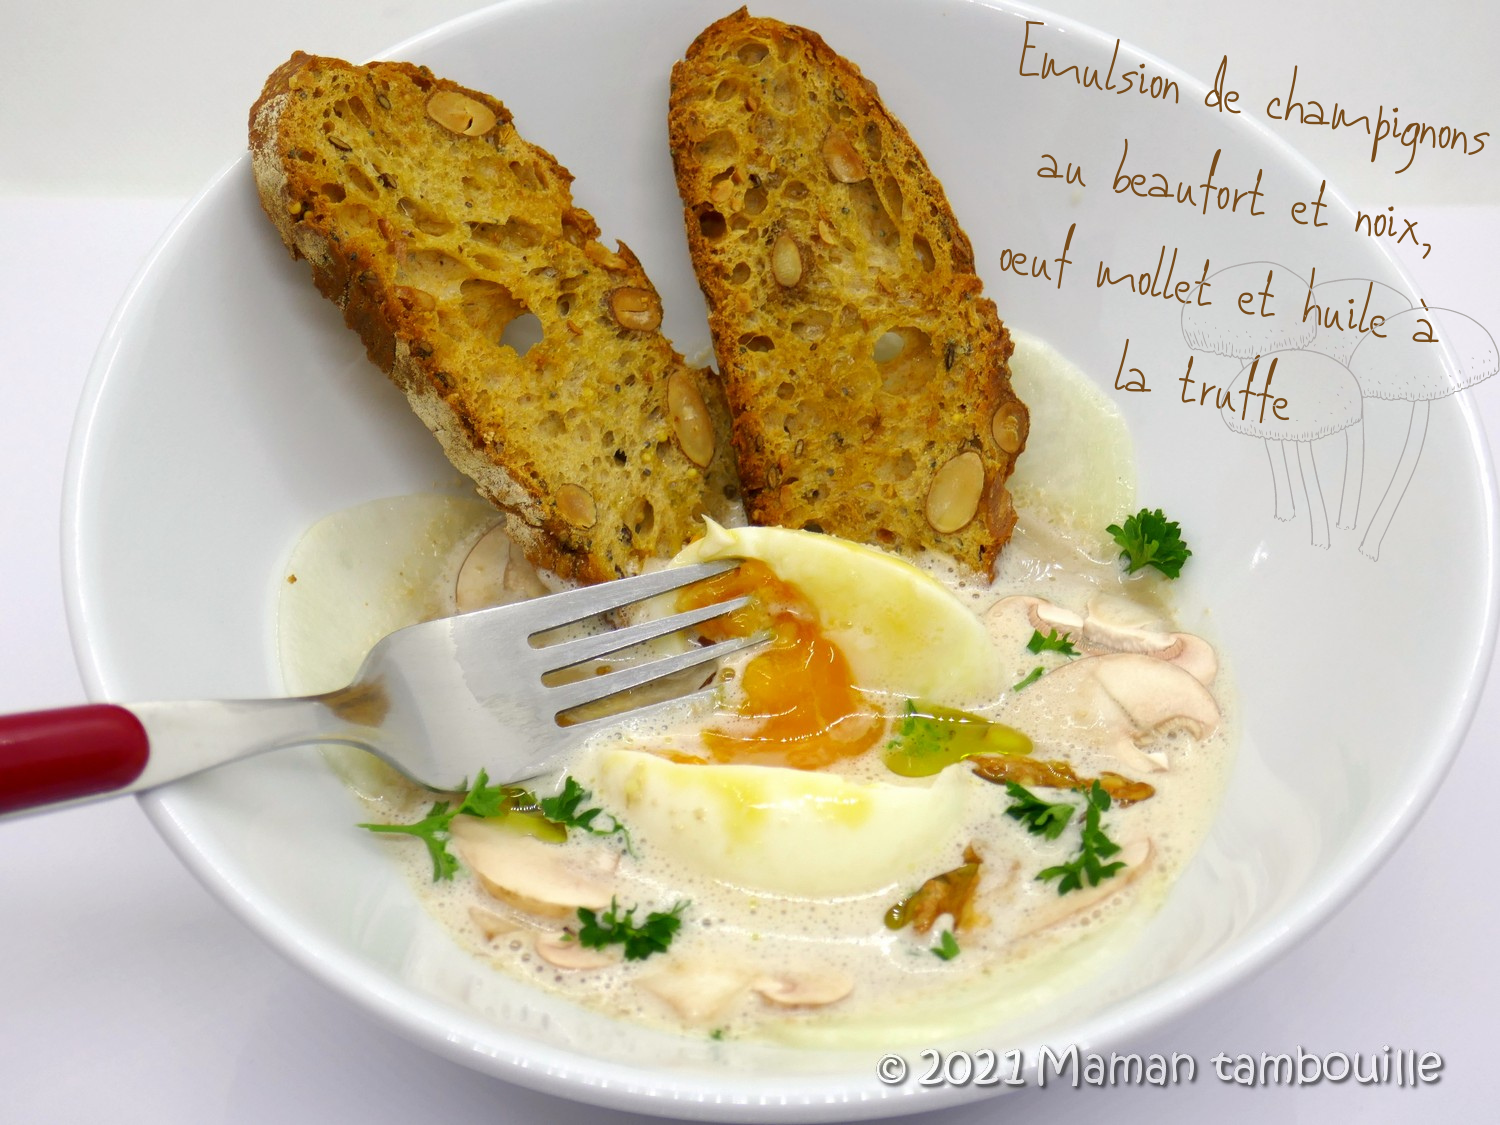 You are currently viewing Emulsion de champignons au beaufort, oeuf mollet